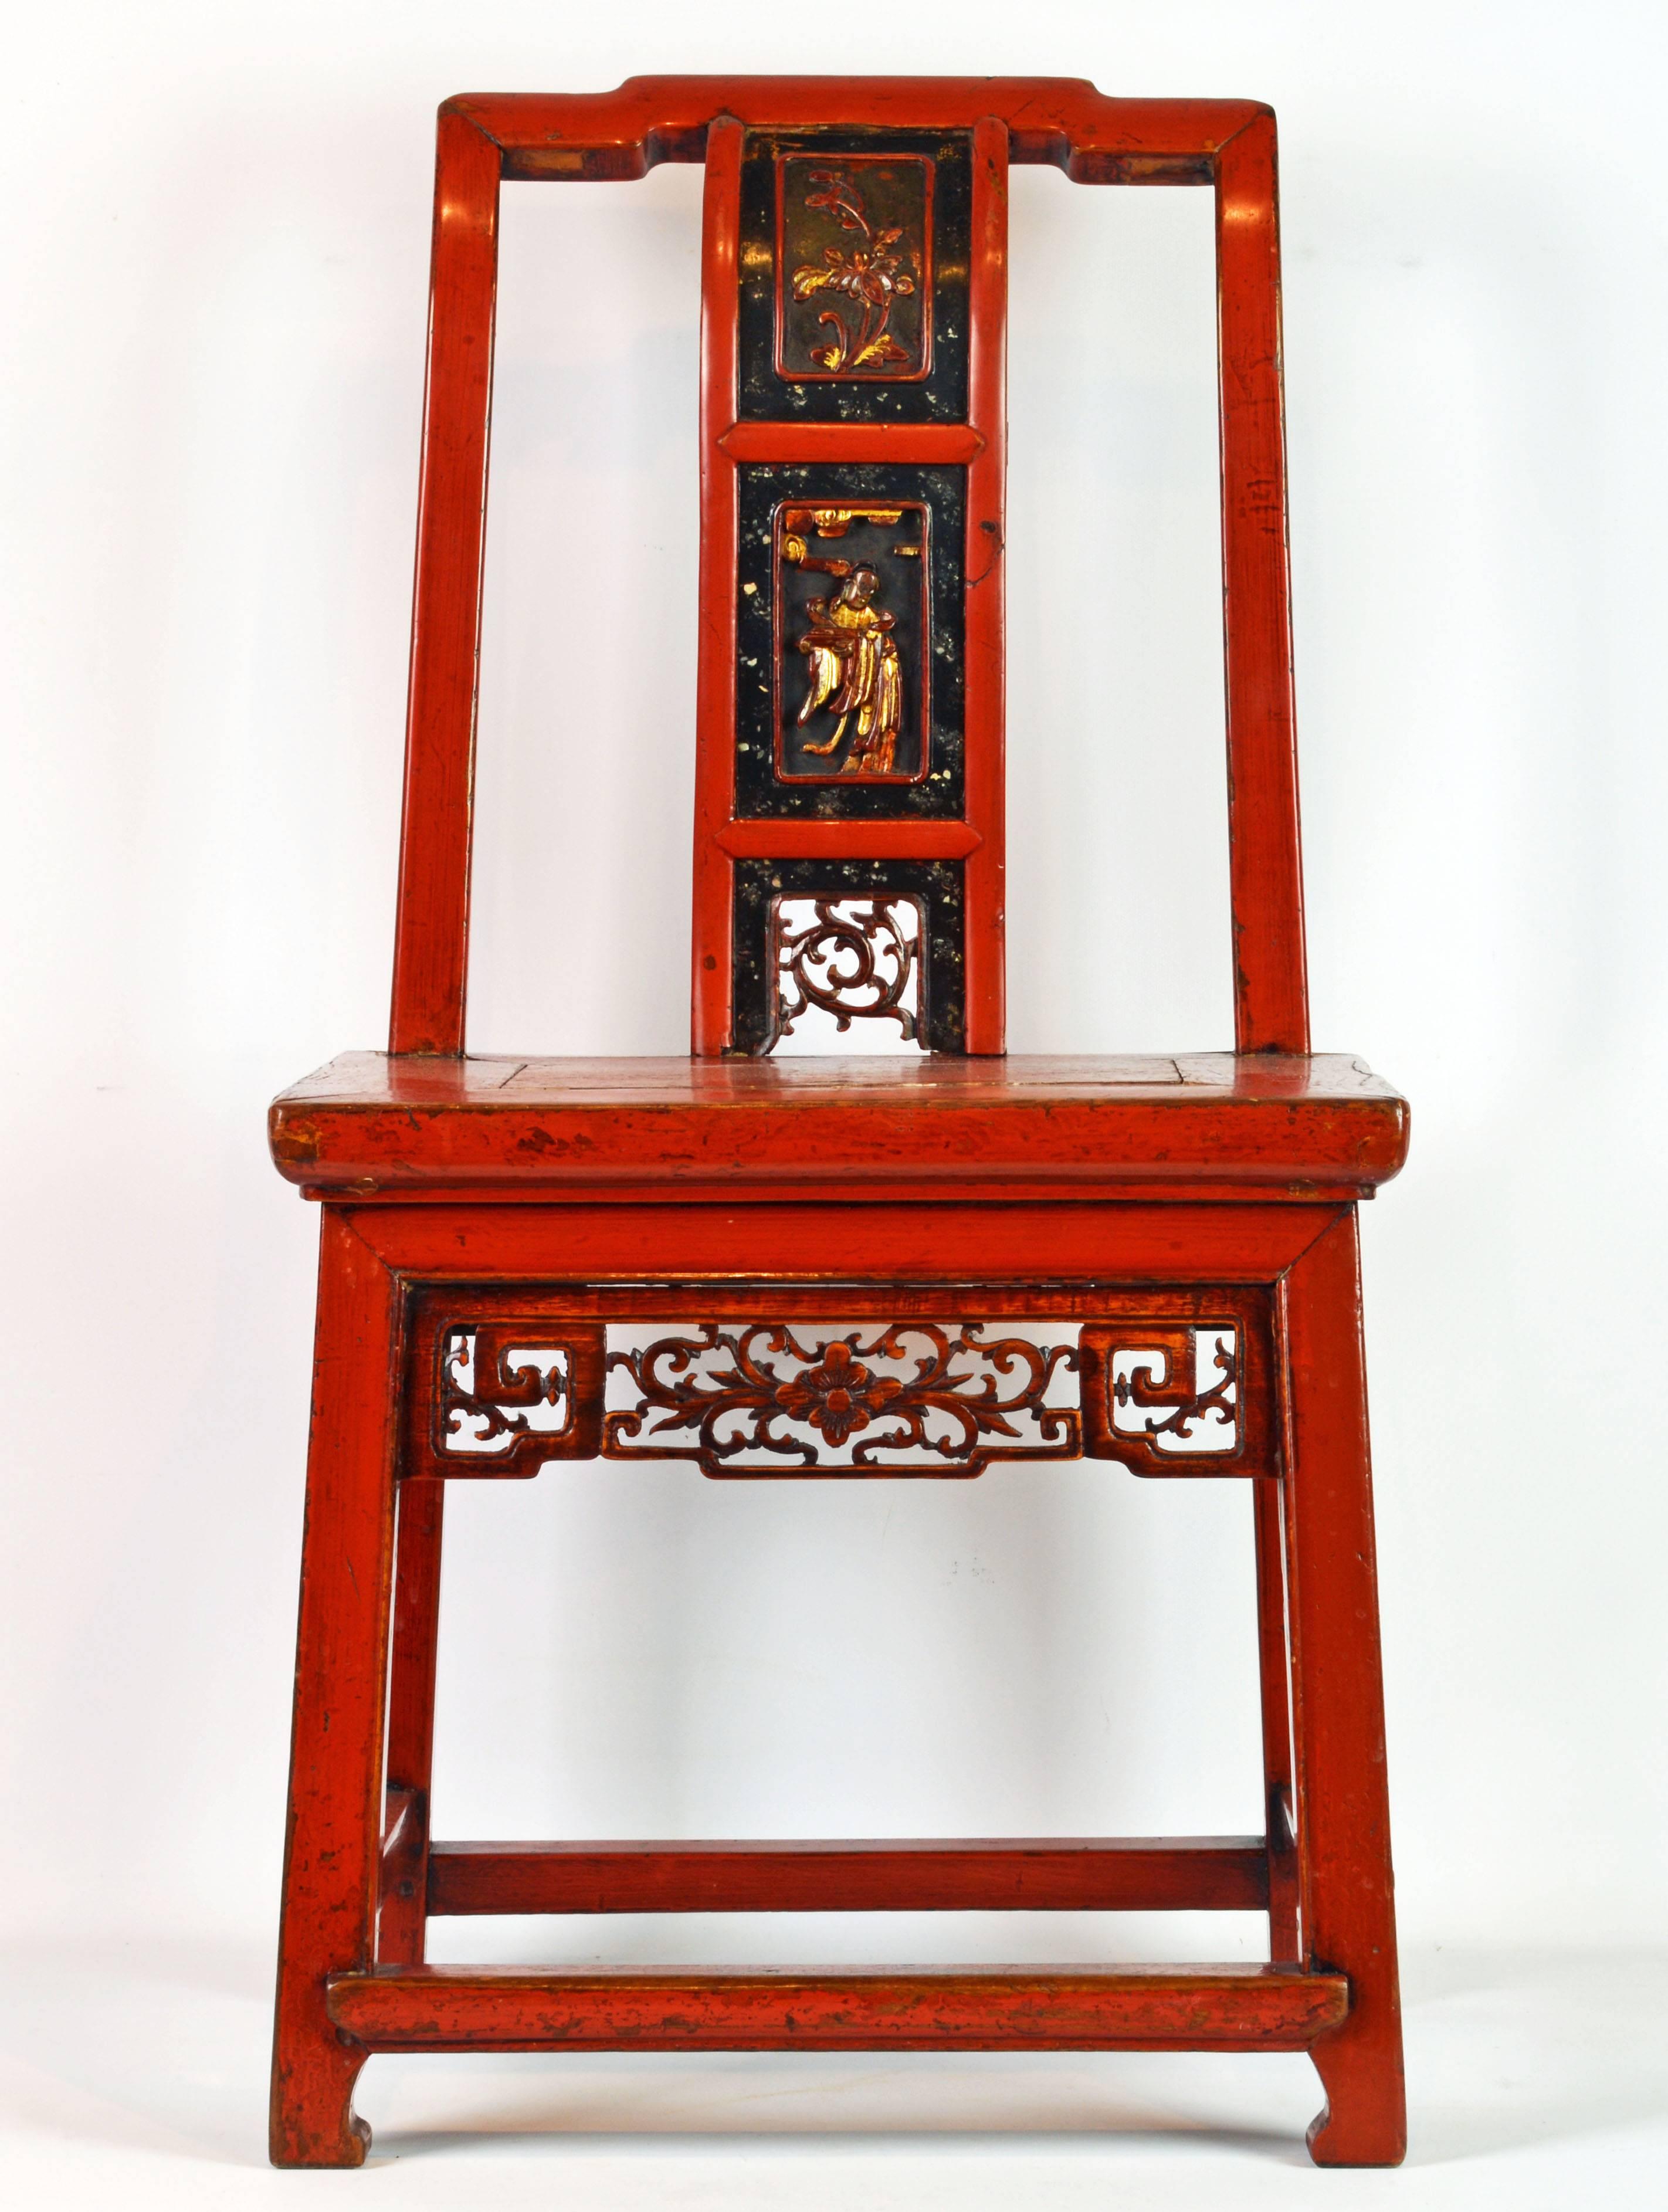 This beautiful small chair features a rich red color with proper patina and wear. The splat of the back is divided into three sections, the upper with a floral design above the main panel carved with a figure and the lower section filled with carved